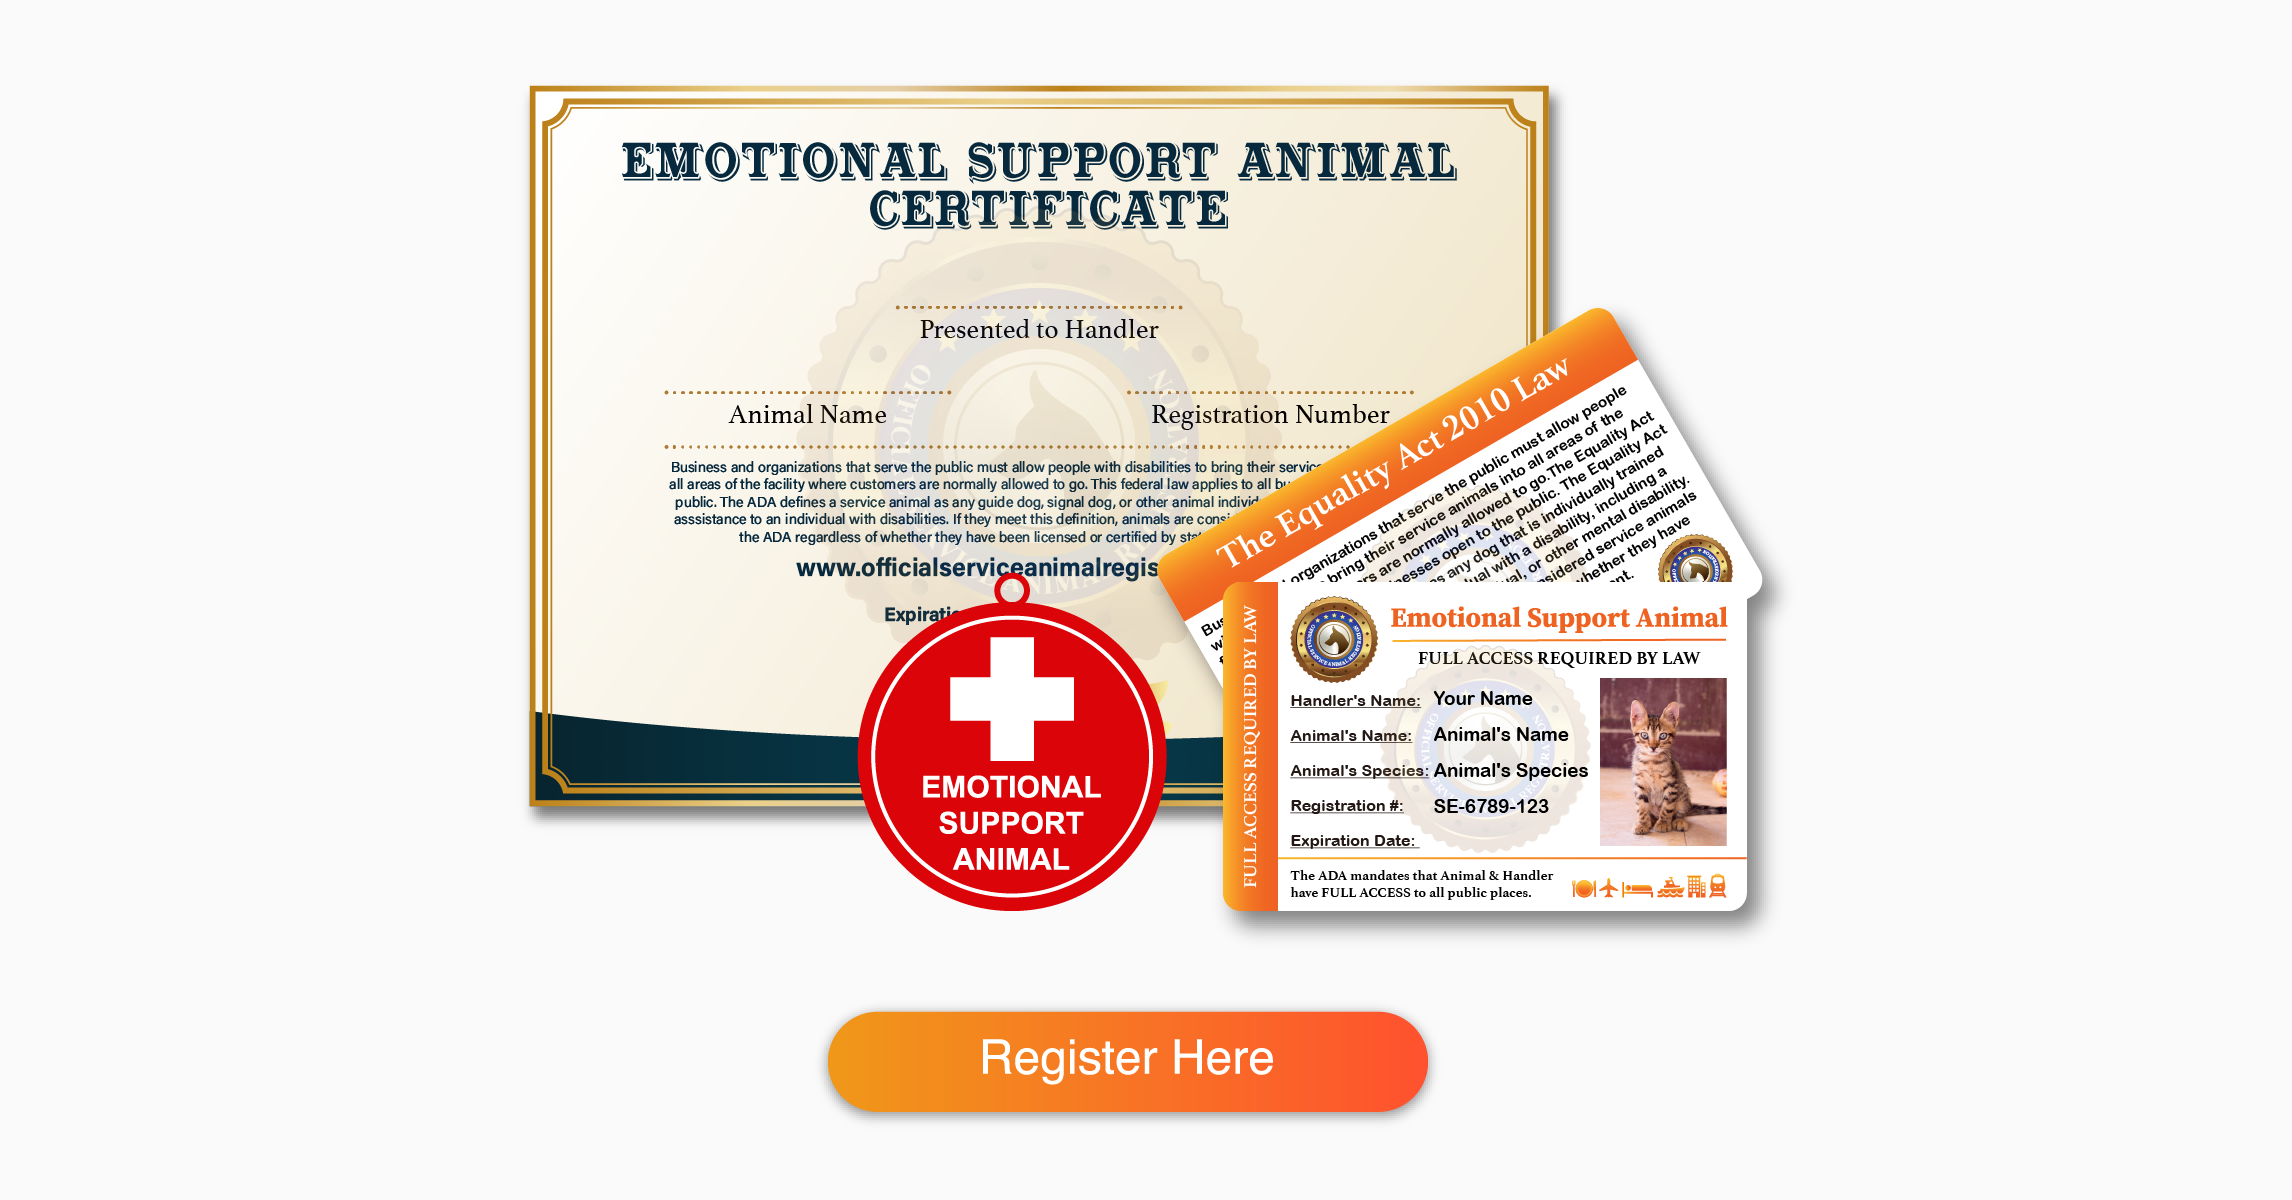 How To Qualify For An Emotional Support Dog In The U K